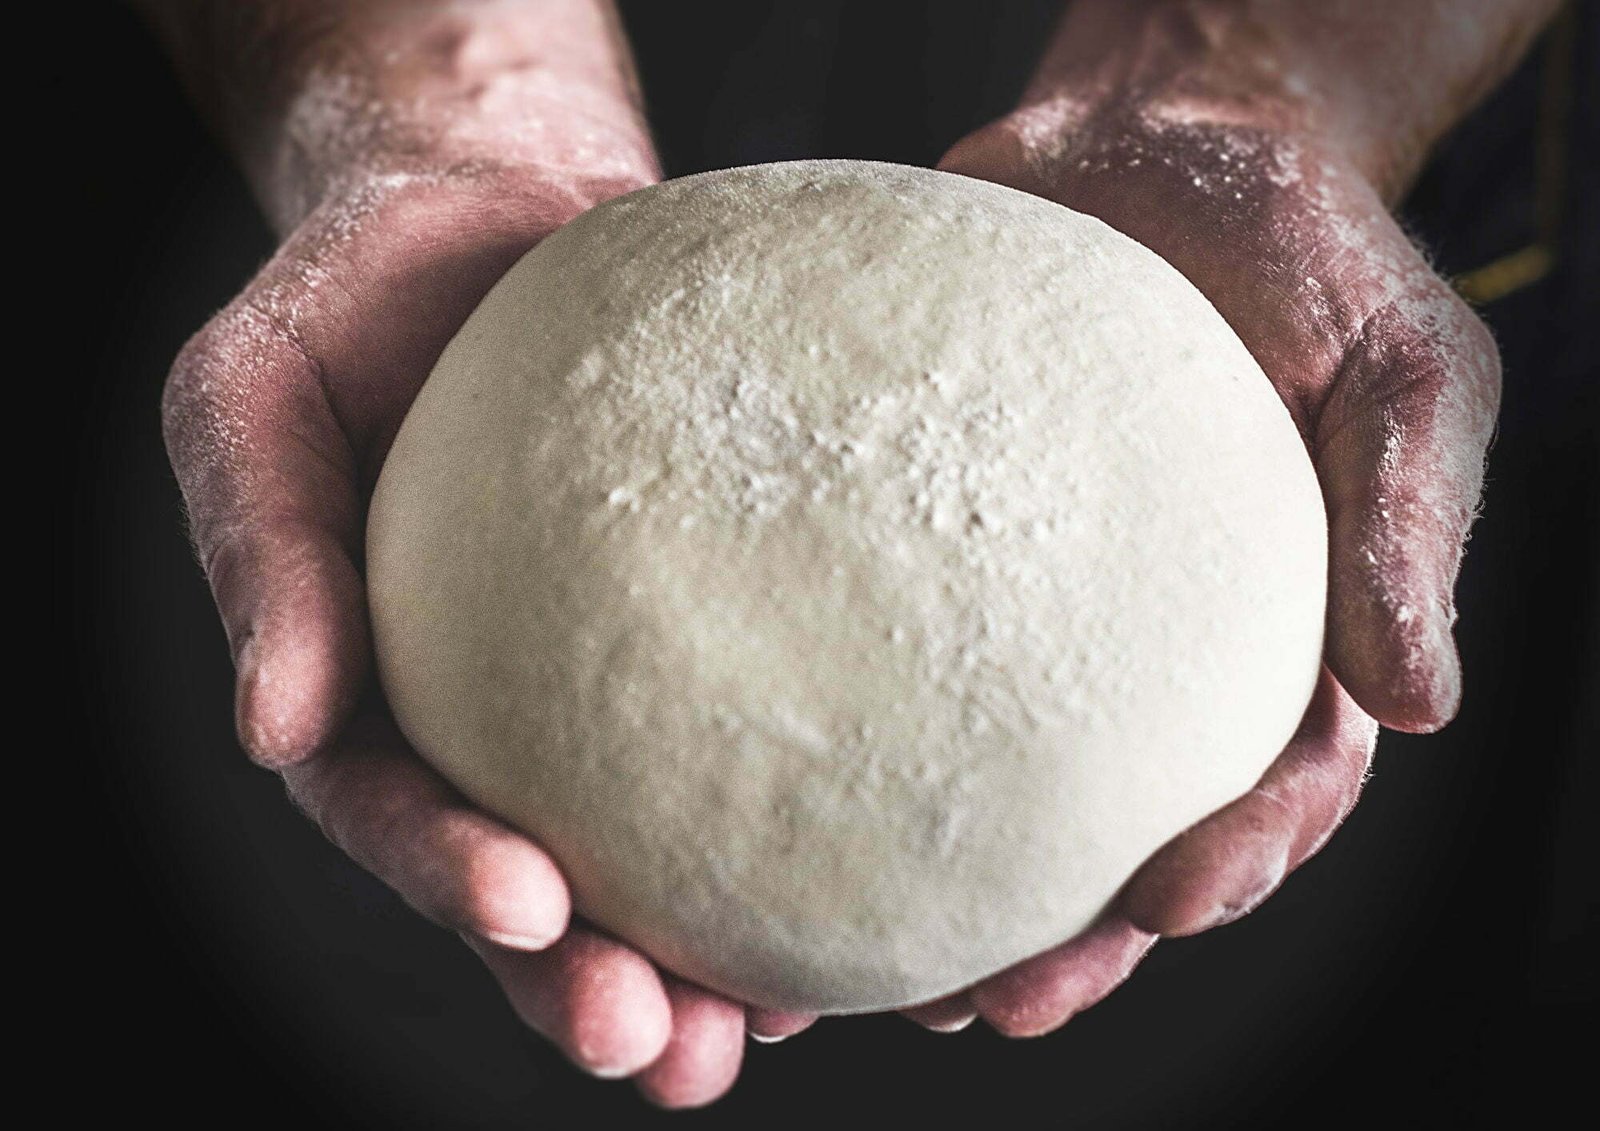 A large ball of dough is held by a bakers hands